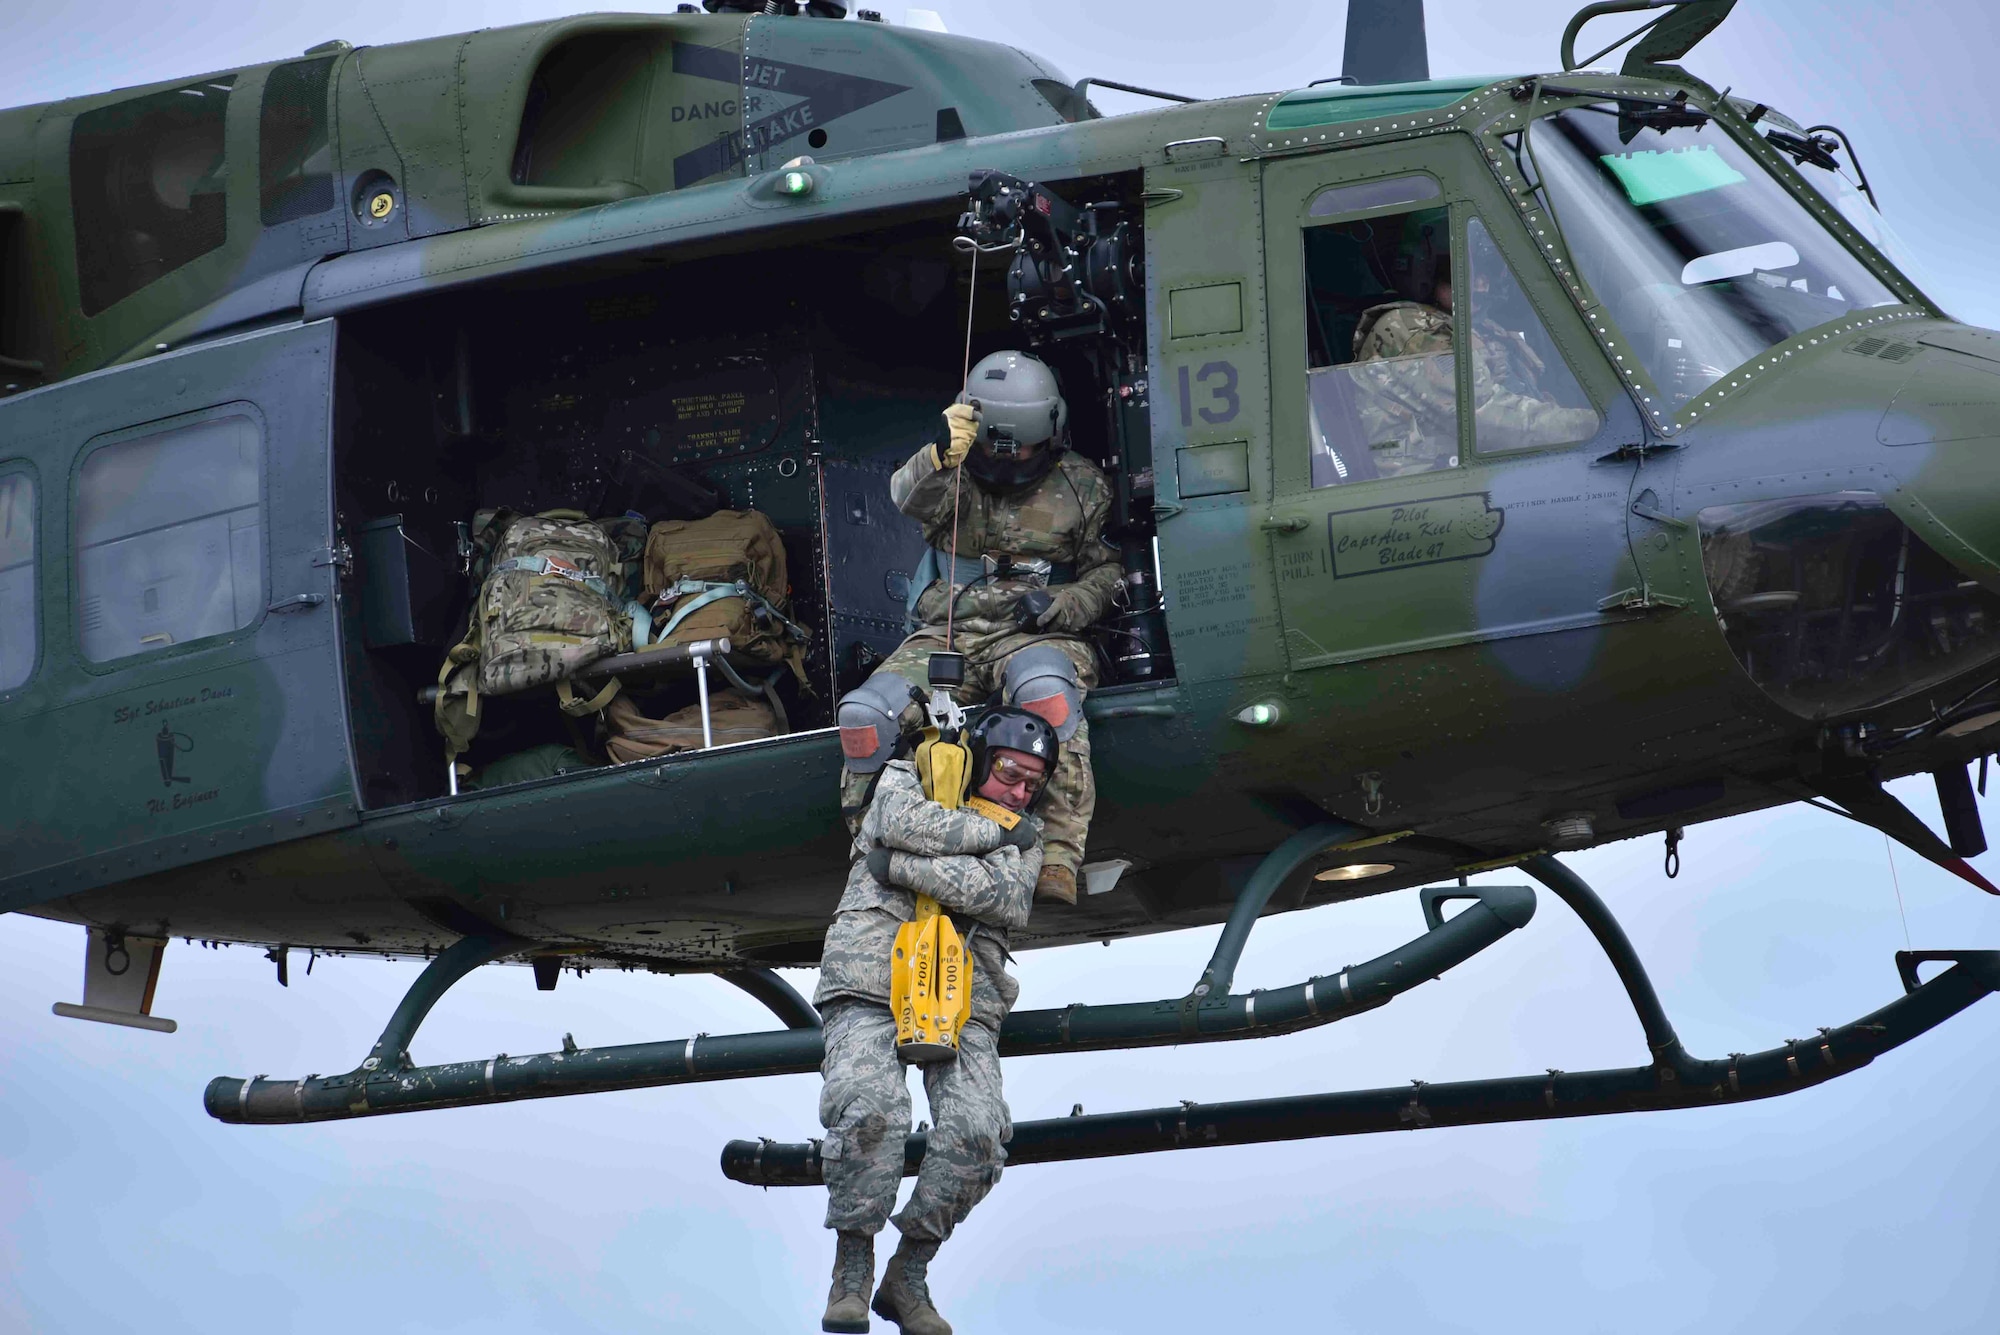 A student from the Survival, Evasion, Resistance and Escape school is hoisted into a Bell UH-1N Iroquois helicopter from the 36th Rescue Squadron at Fairchild Air Force Base, Washington, Jan. 30, 2020. The mission of the 36th RQS is to provide training and support to the Airmen working and training at the SERE school and to help the local community with search and rescue operations. (U.S. Air Force photo by 1st Class Airman Kiaundra Miller)